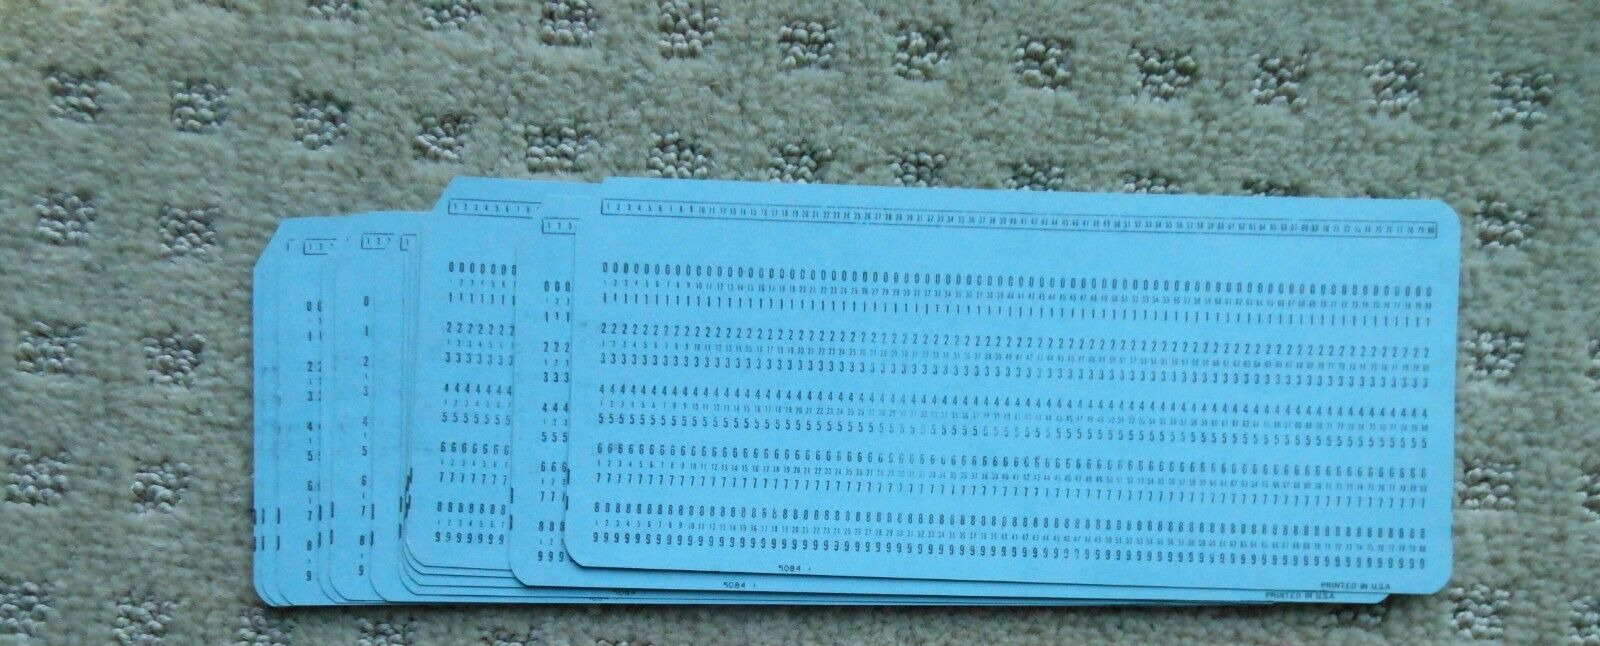 IBM 1960-70s Lot of 100 blue punch cards ...